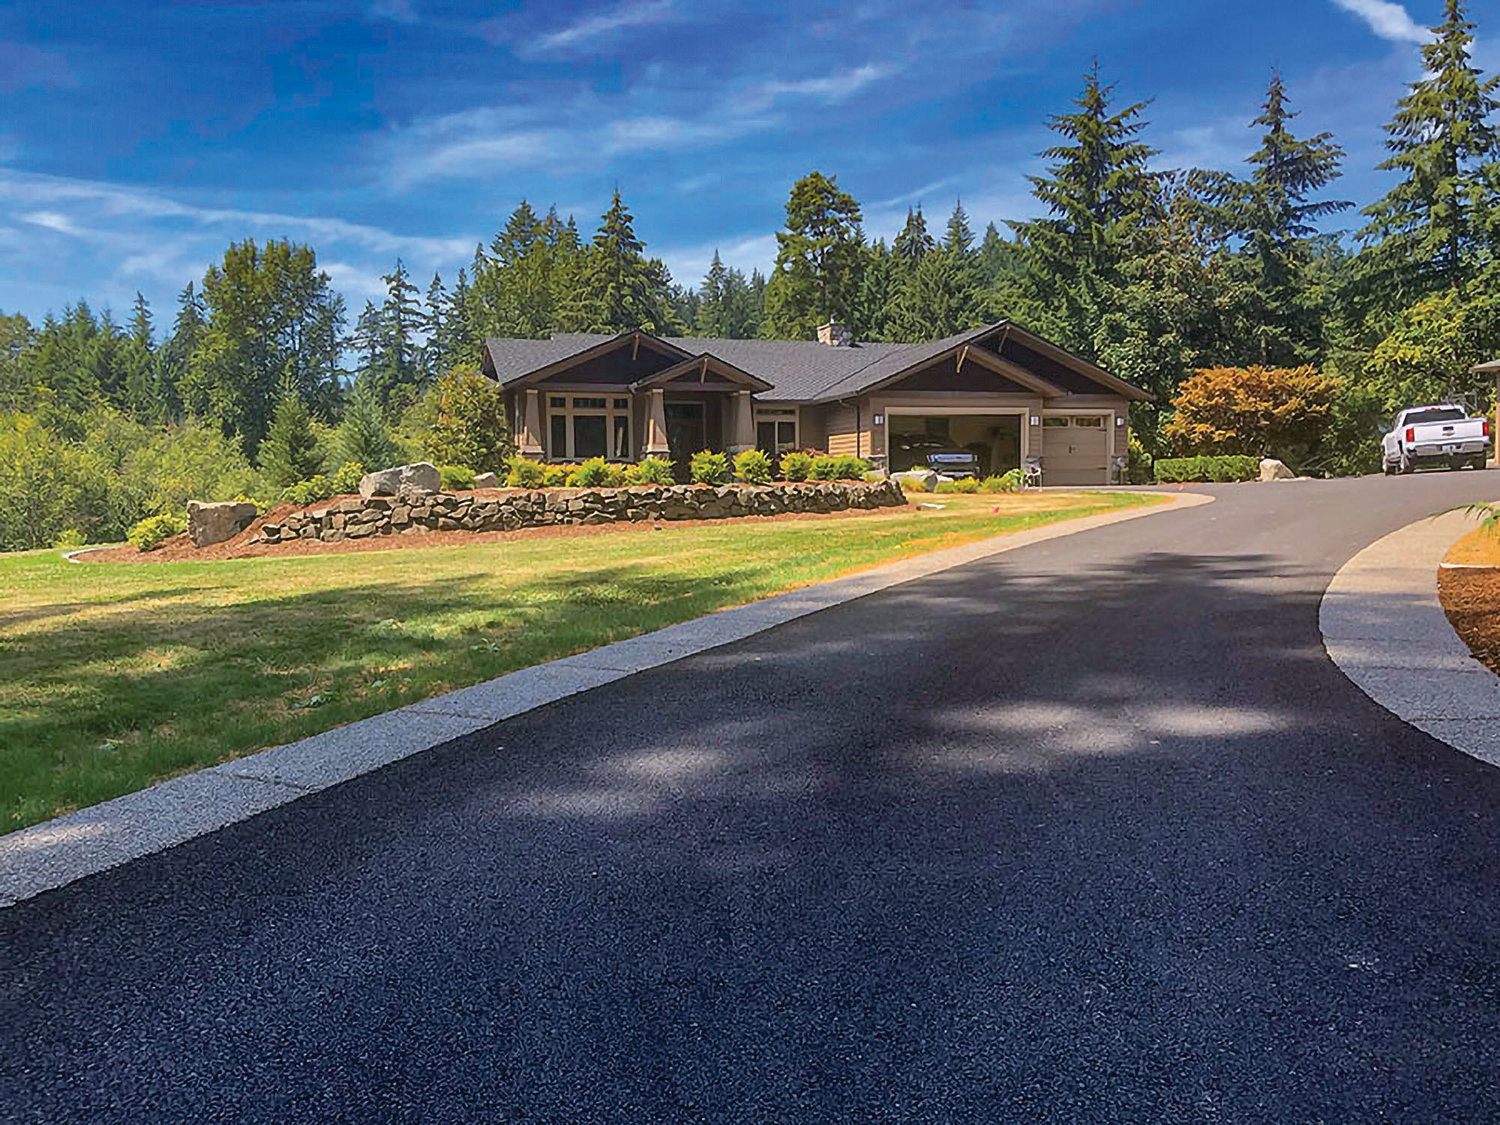 A driveway done by Clark County Paving in Hockinson is pictured.